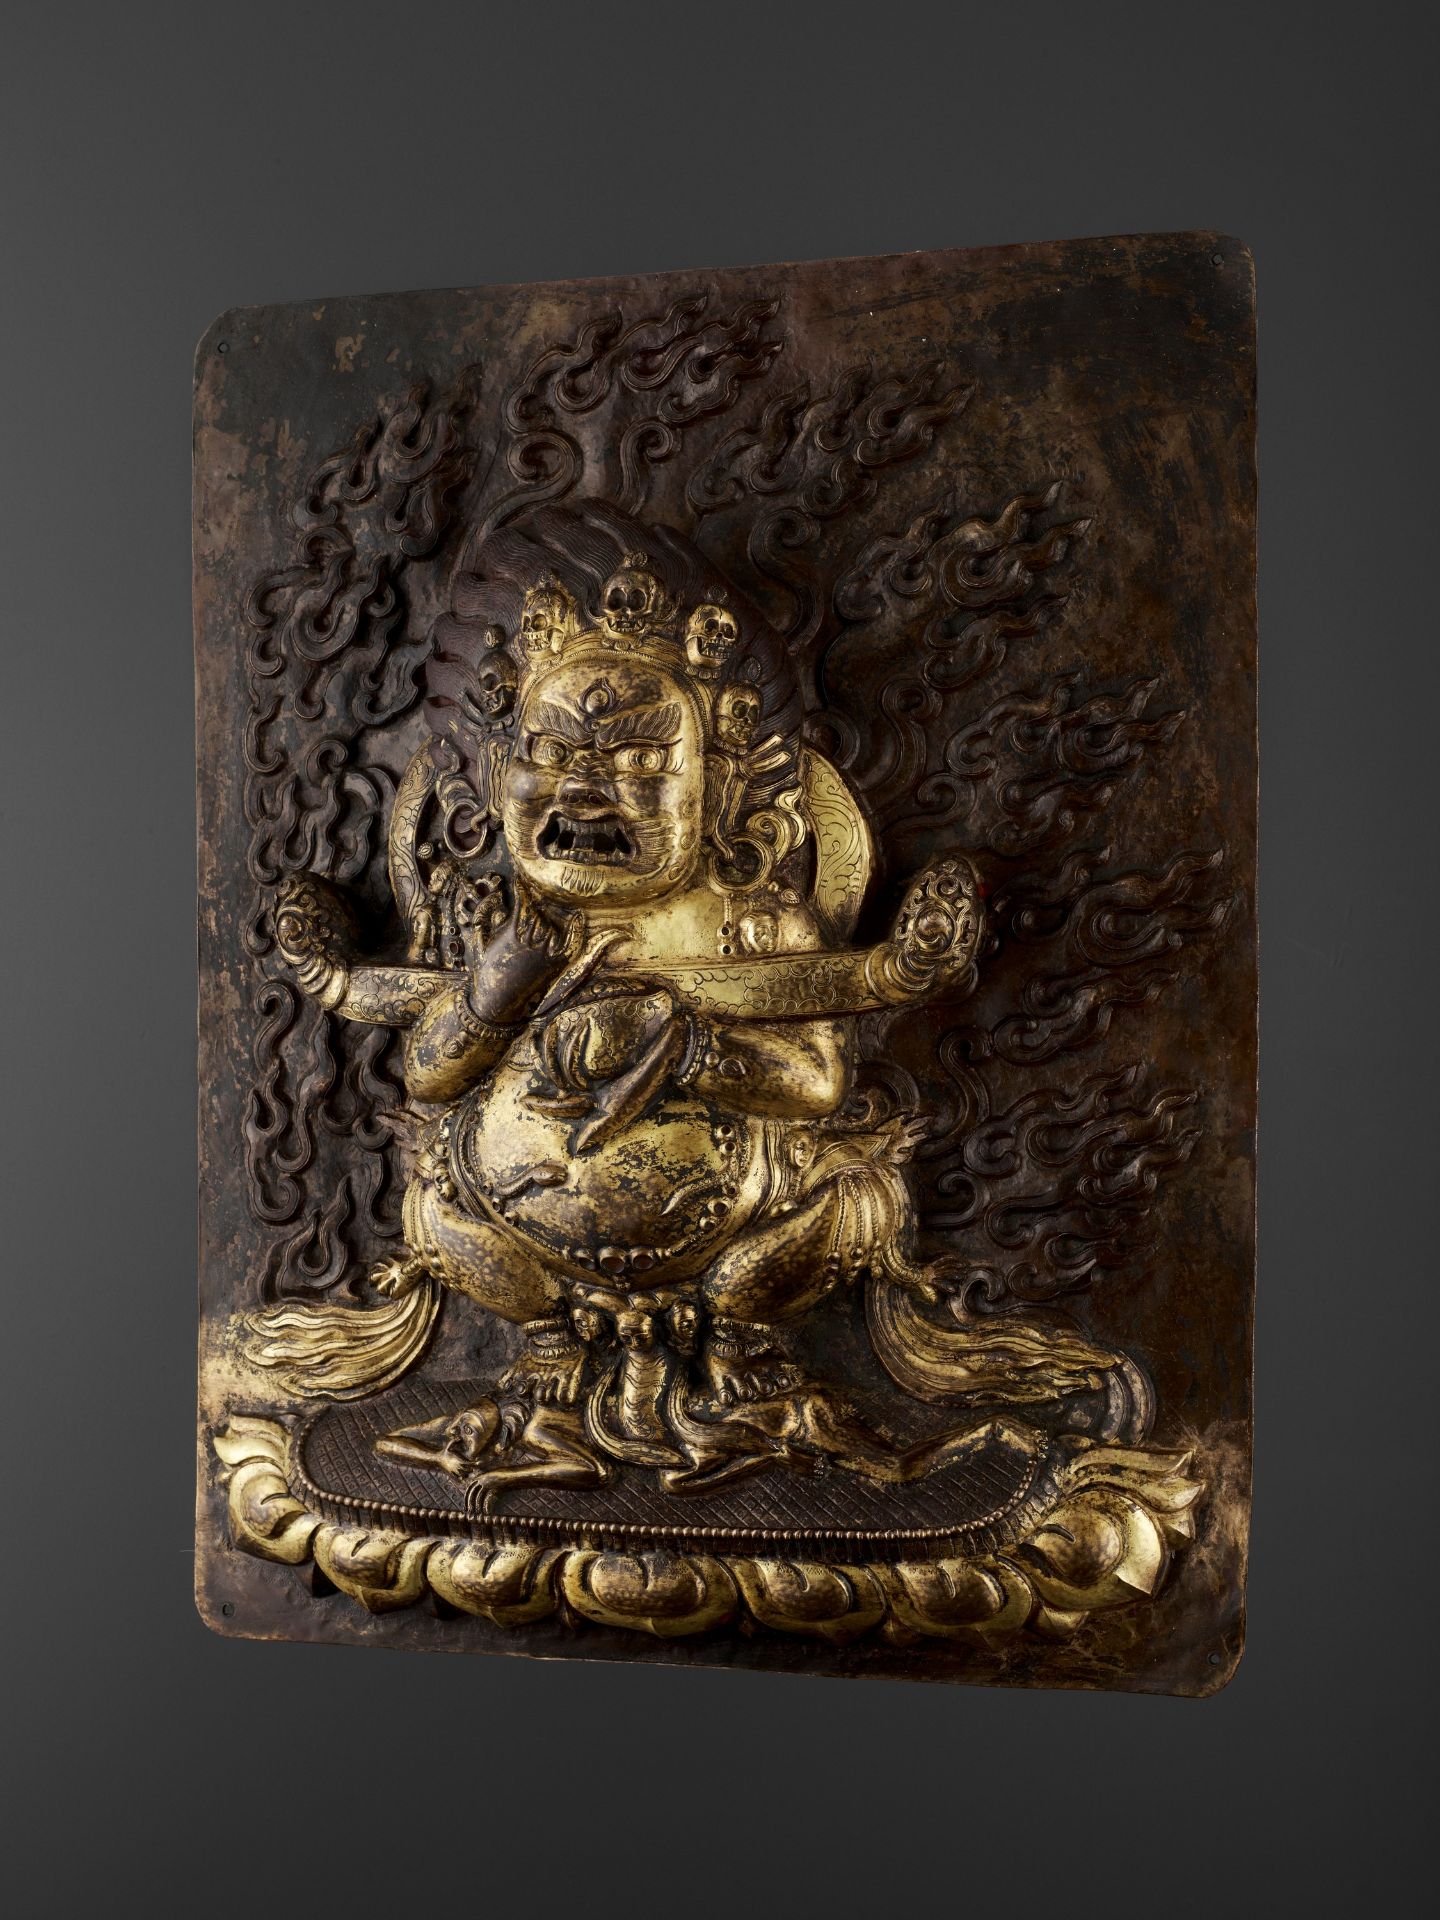 A LARGE GILT-COPPER REPOUSSE RELIEF OF MAHAKALA, 18TH-19TH CENTURY - Image 6 of 8